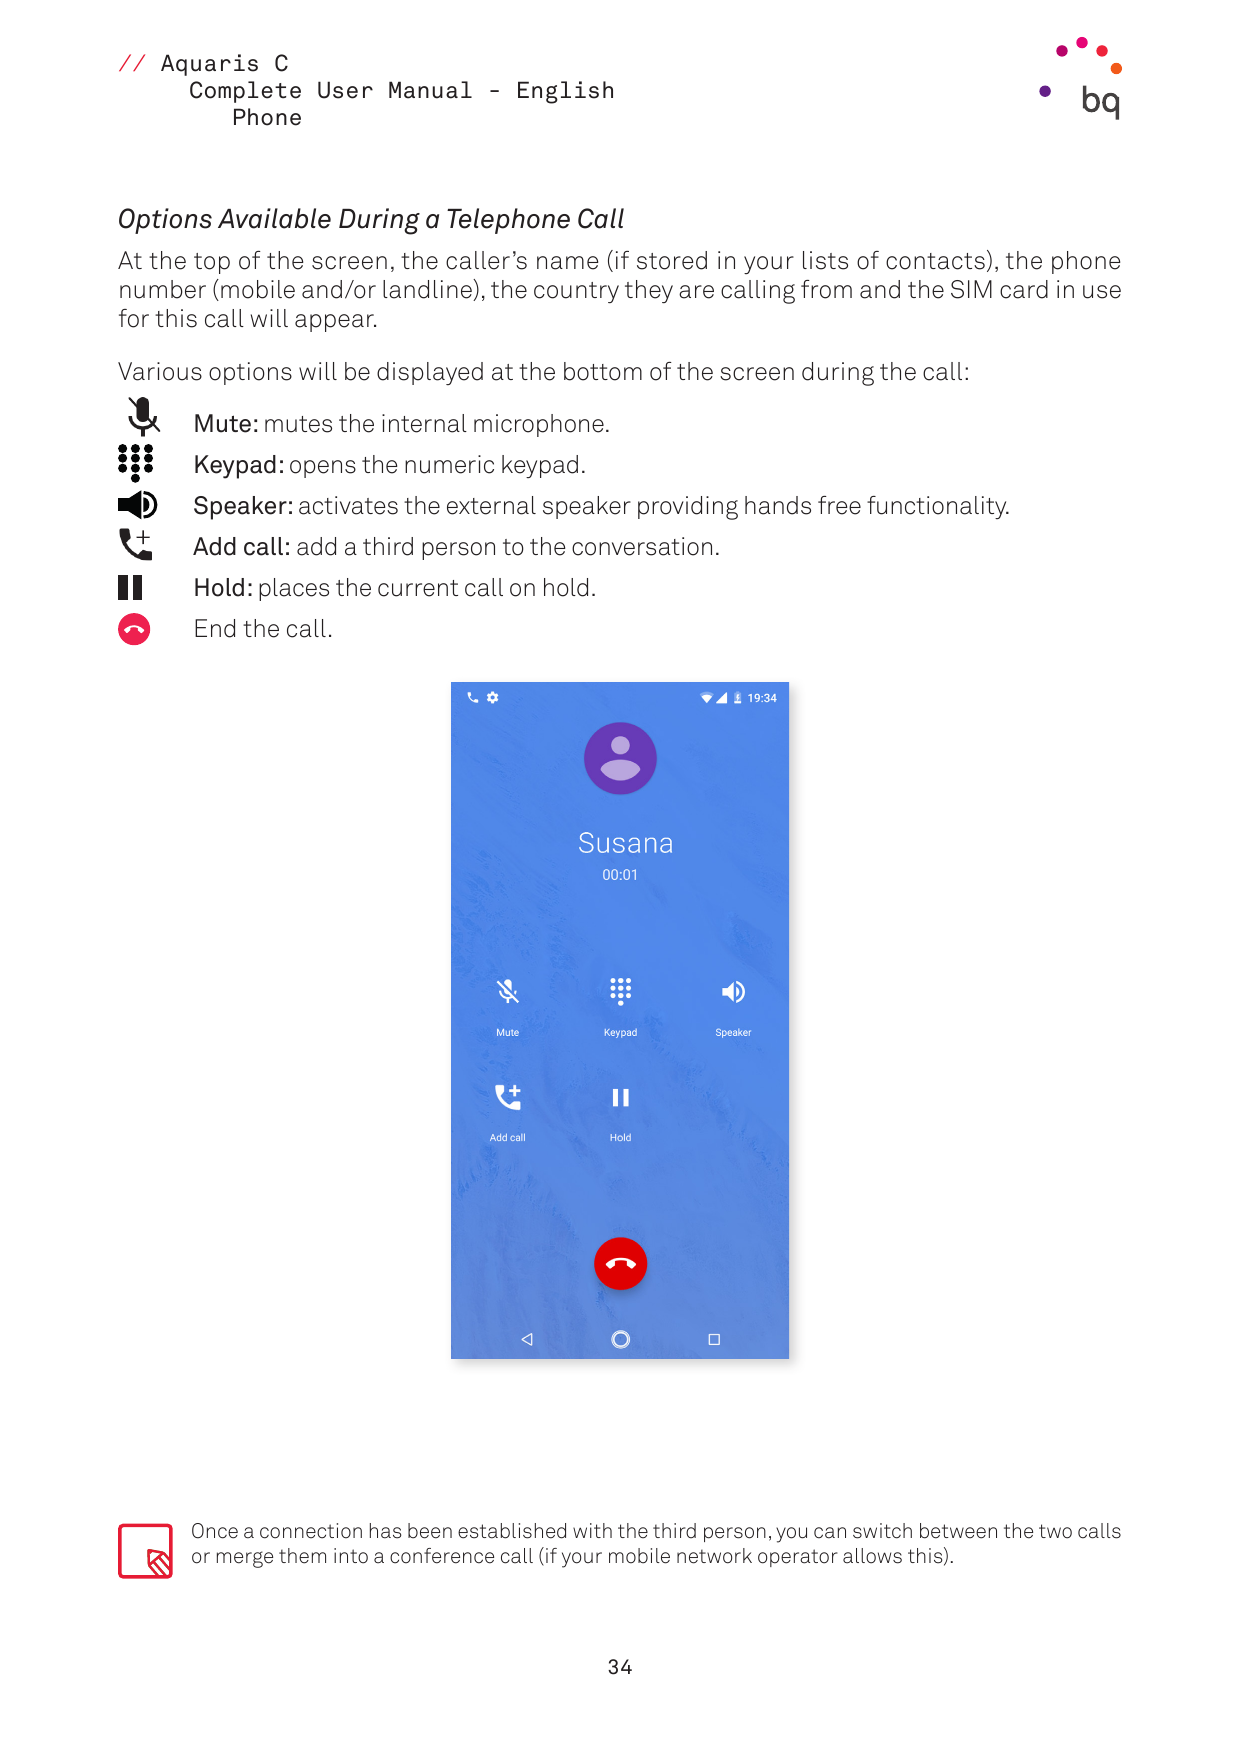 // Aquaris CComplete User Manual - EnglishPhoneOptions Available During a Telephone CallAt the top of the screen, the caller’s n